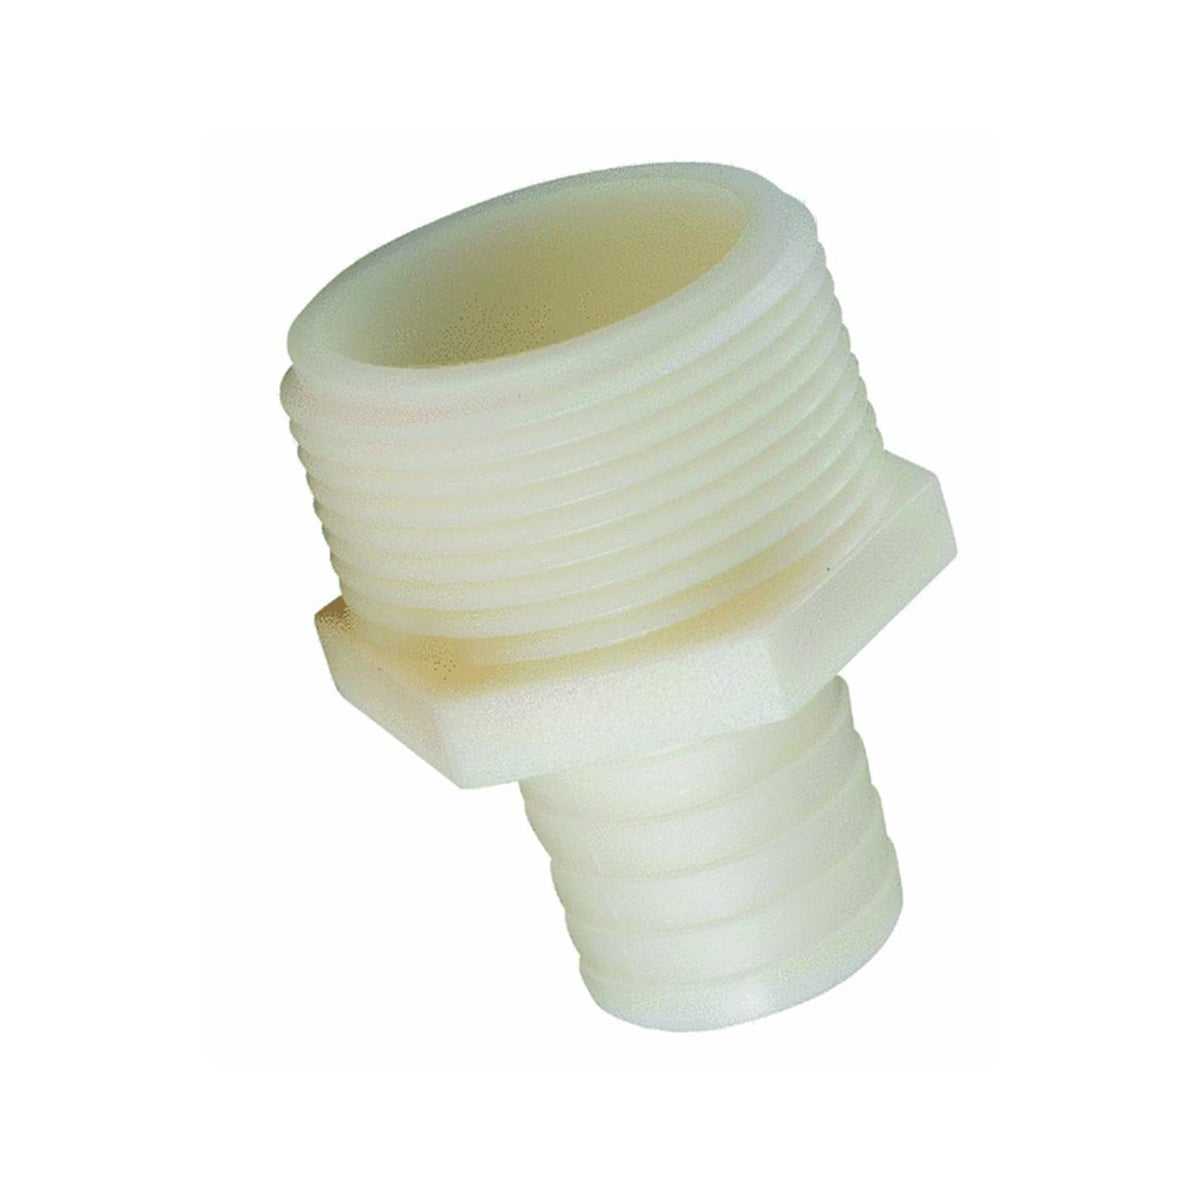 buy insert fittings & thrd nylon at cheap rate in bulk. wholesale & retail plumbing tools & equipments store. home décor ideas, maintenance, repair replacement parts